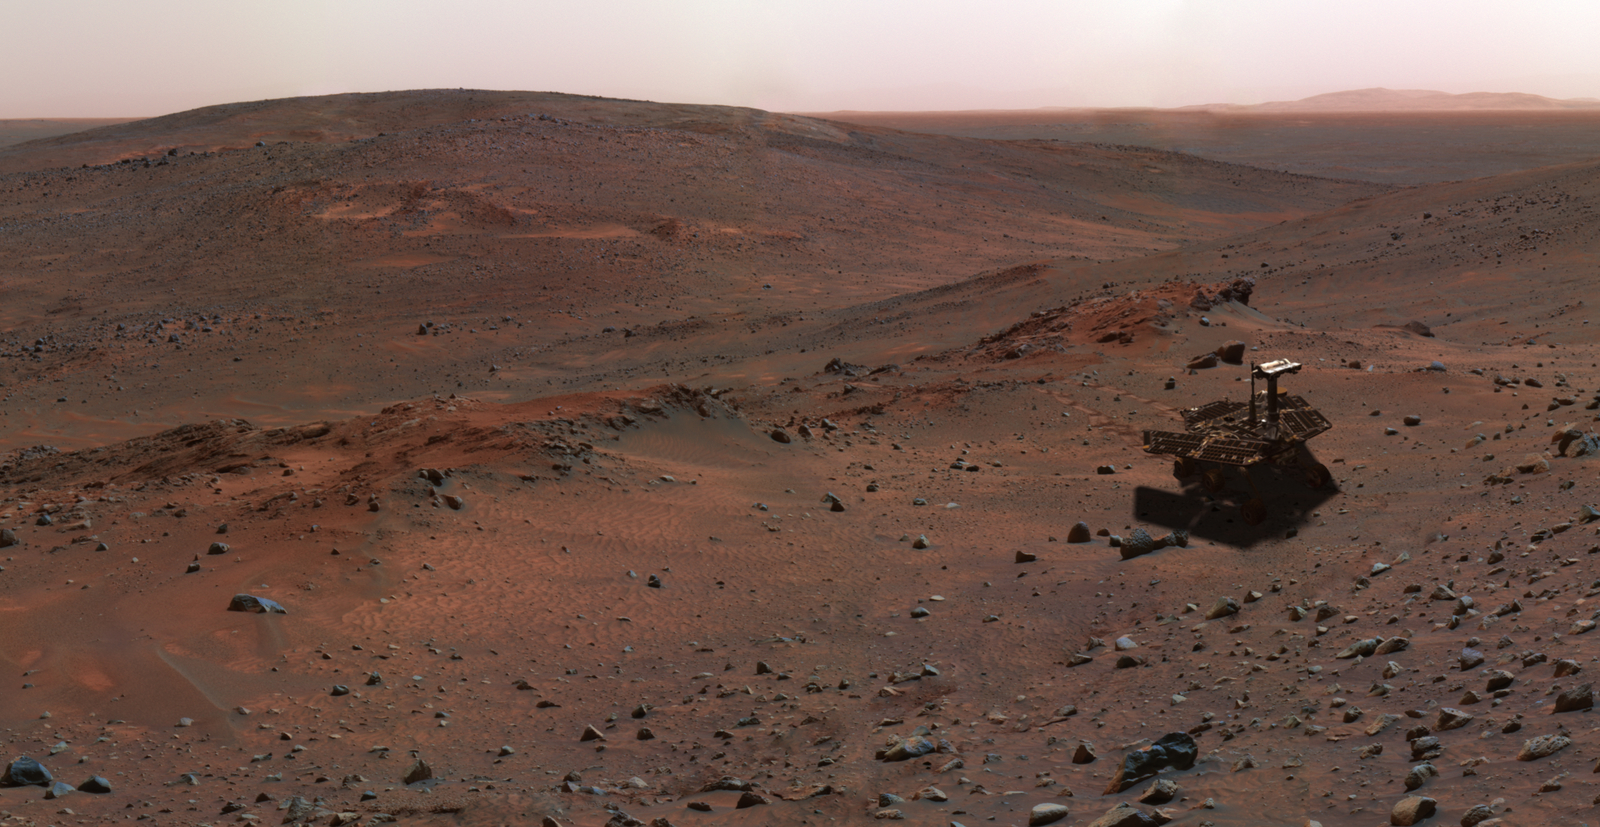 This synthetic image of the Spirit Mars Exploration Rover on the flank of "Husband Hill" was produced using "Virtual Presence in Space" technology.